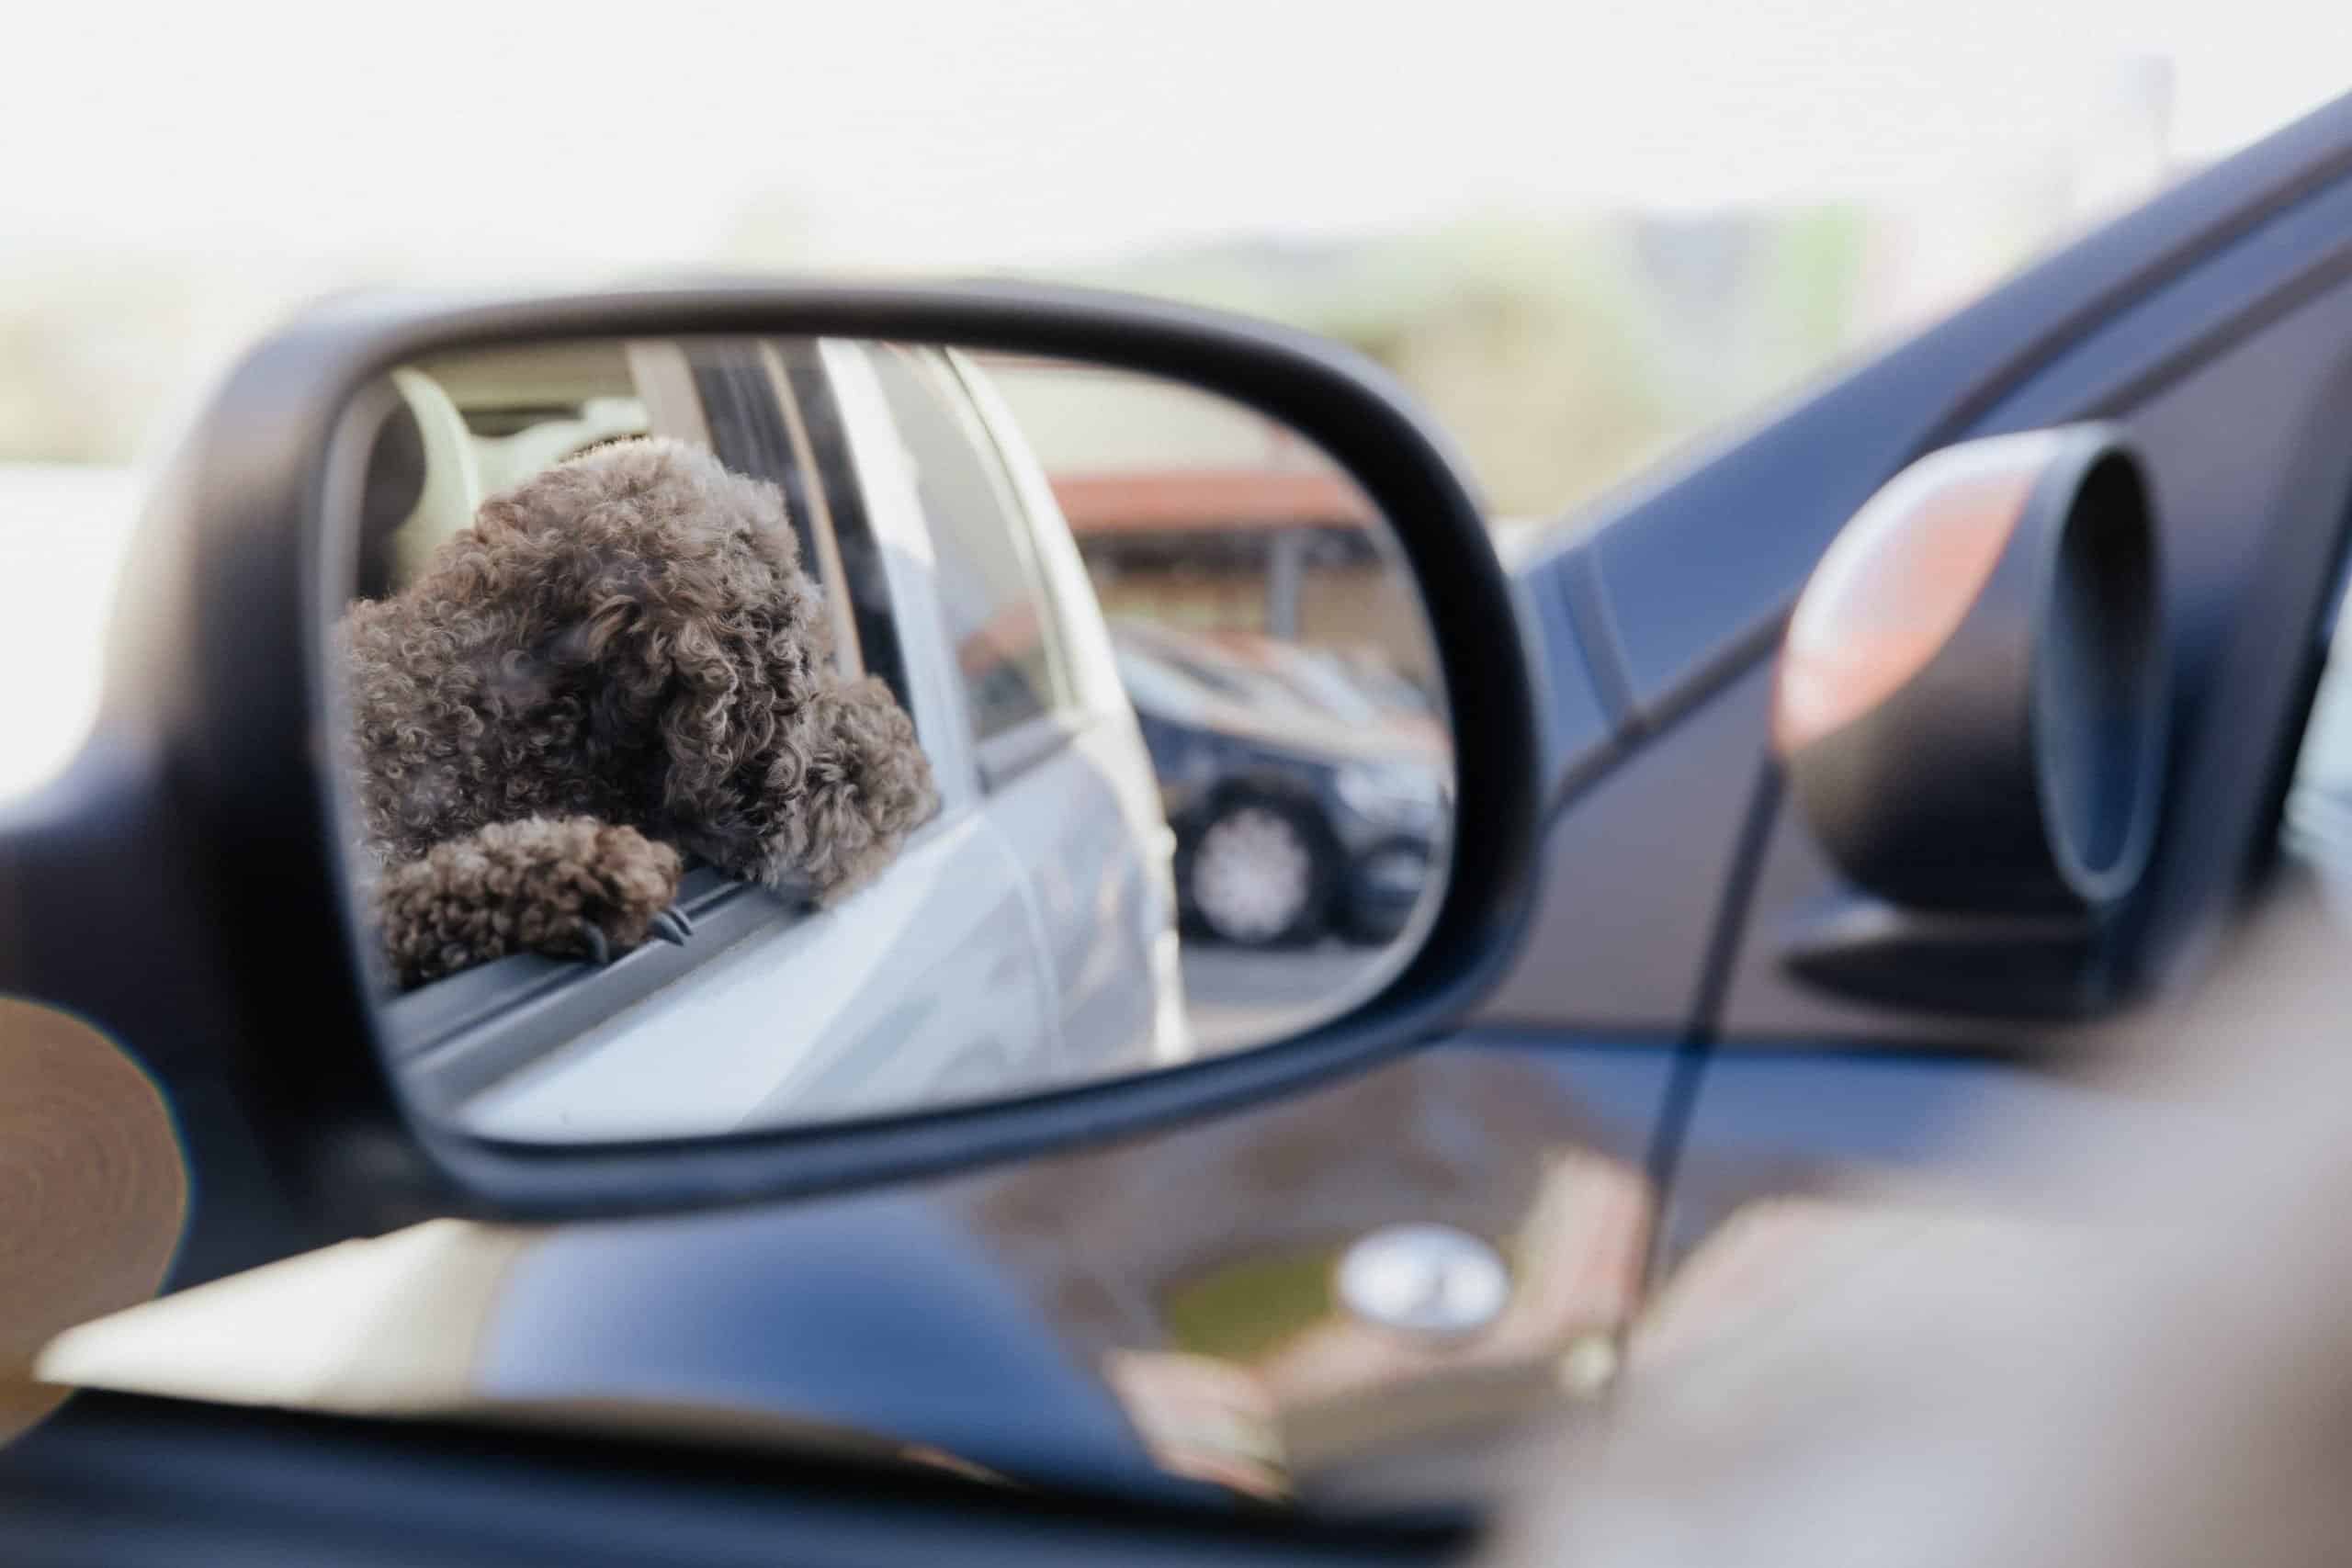 A dog with curly hair is left alone in the car and visible in the mirror.